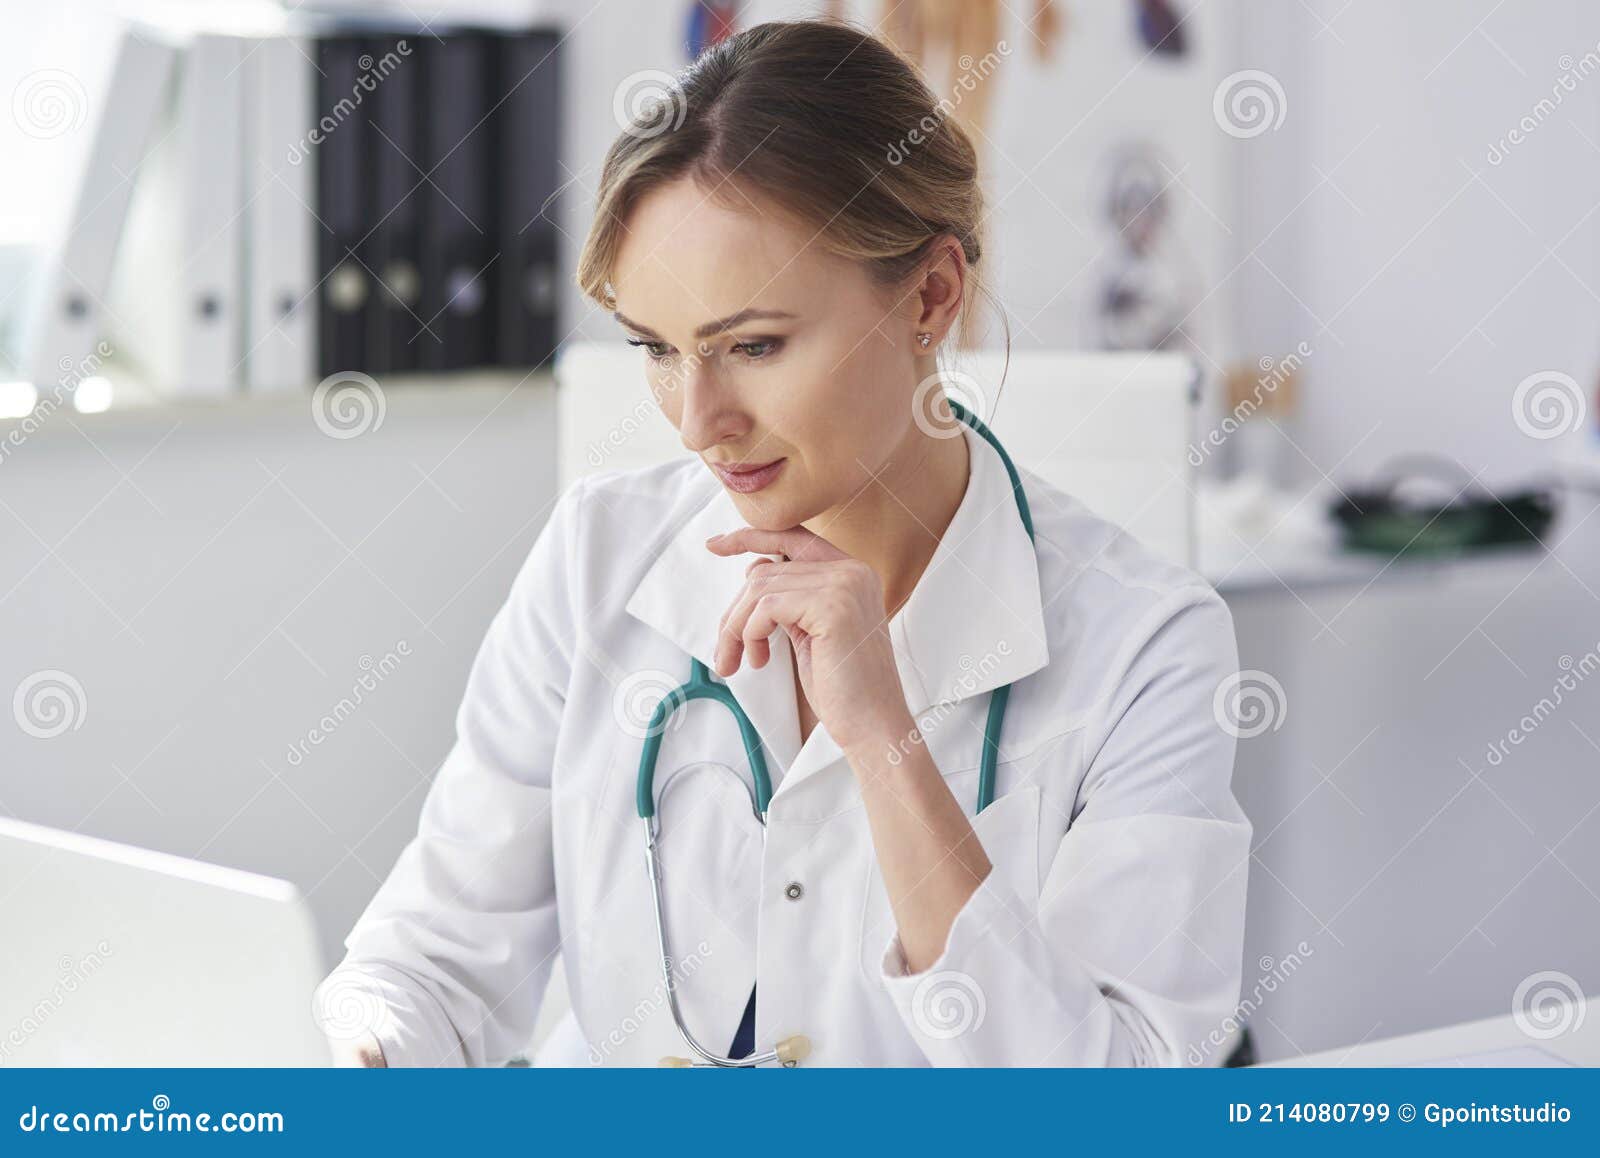 female doctor working with laptop in her doctorÃ¢â¬â¢s office